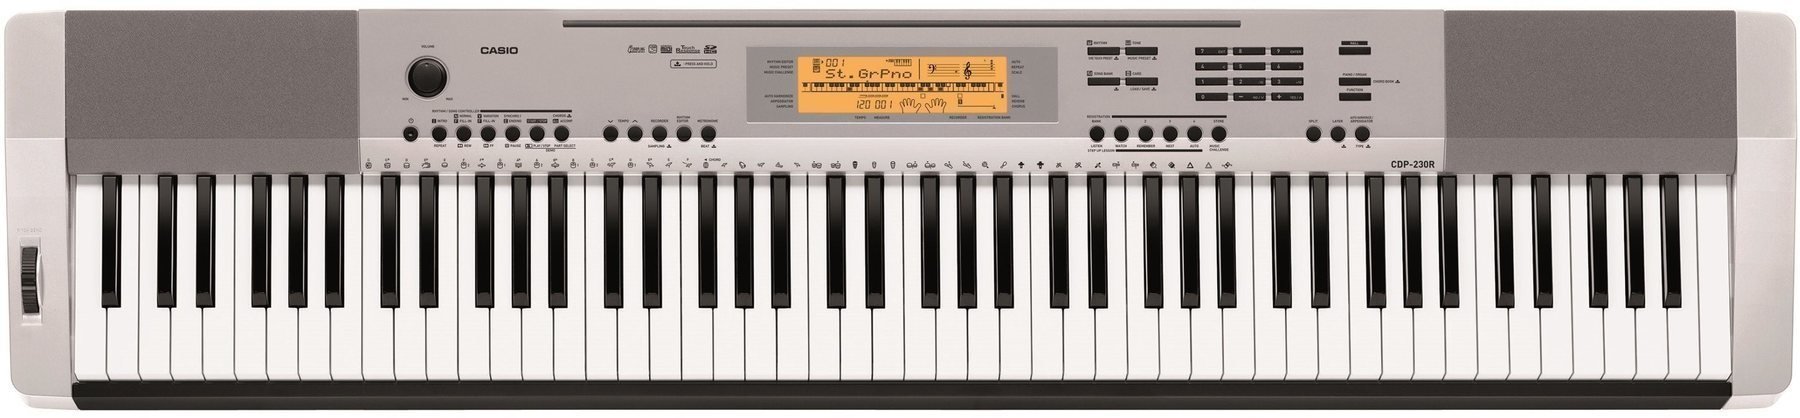 Cyfrowe stage pianino Casio CDP 230R SR